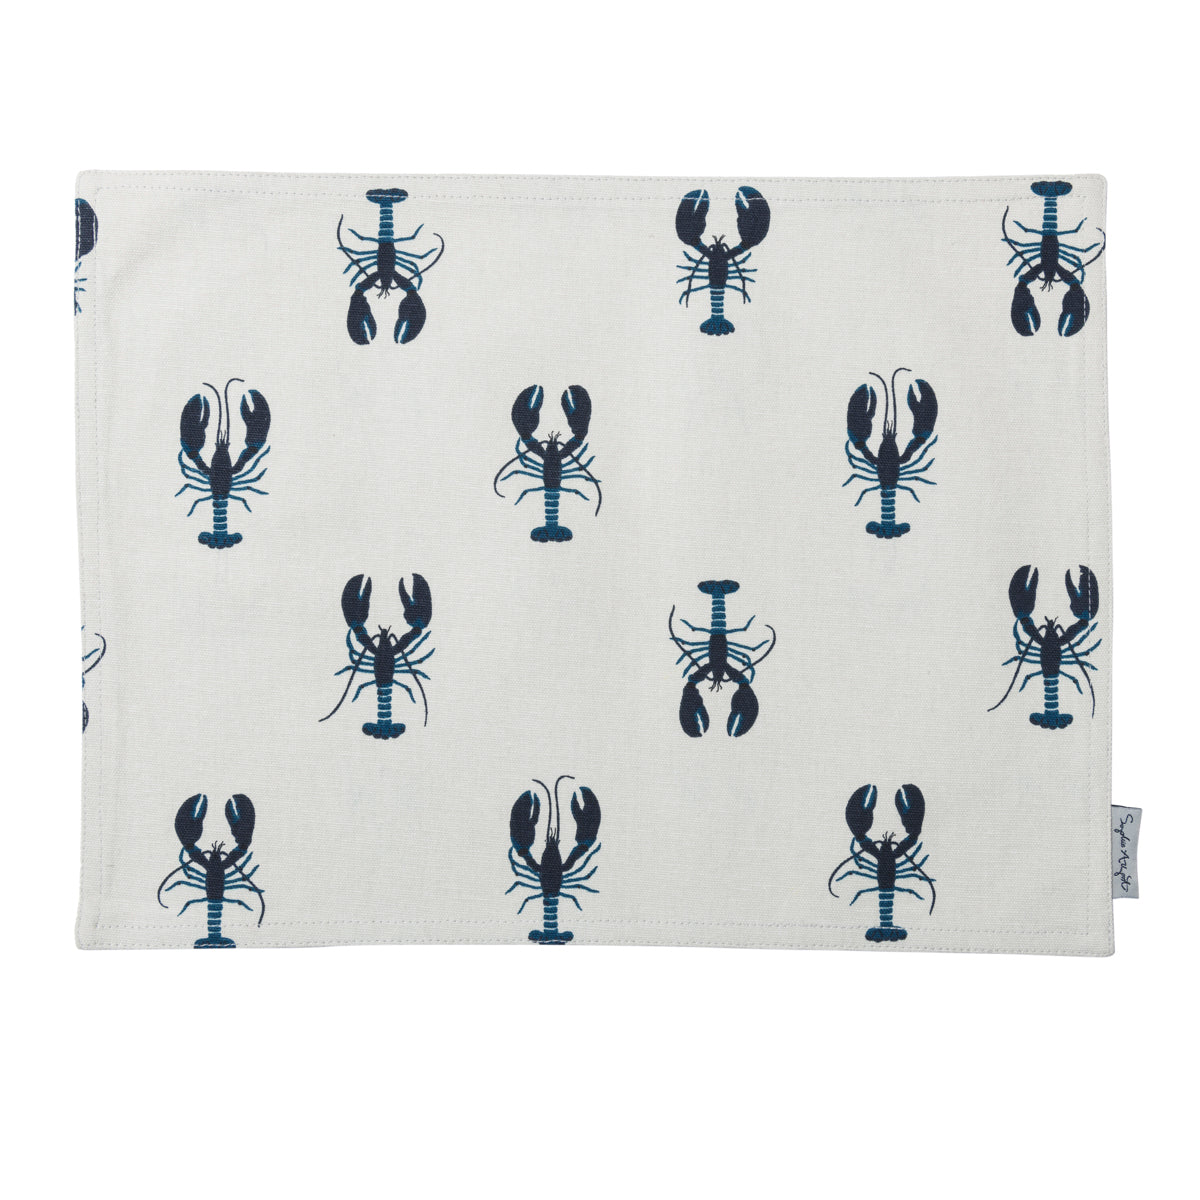 Lobster Fabric Placemat by Sophie Allport